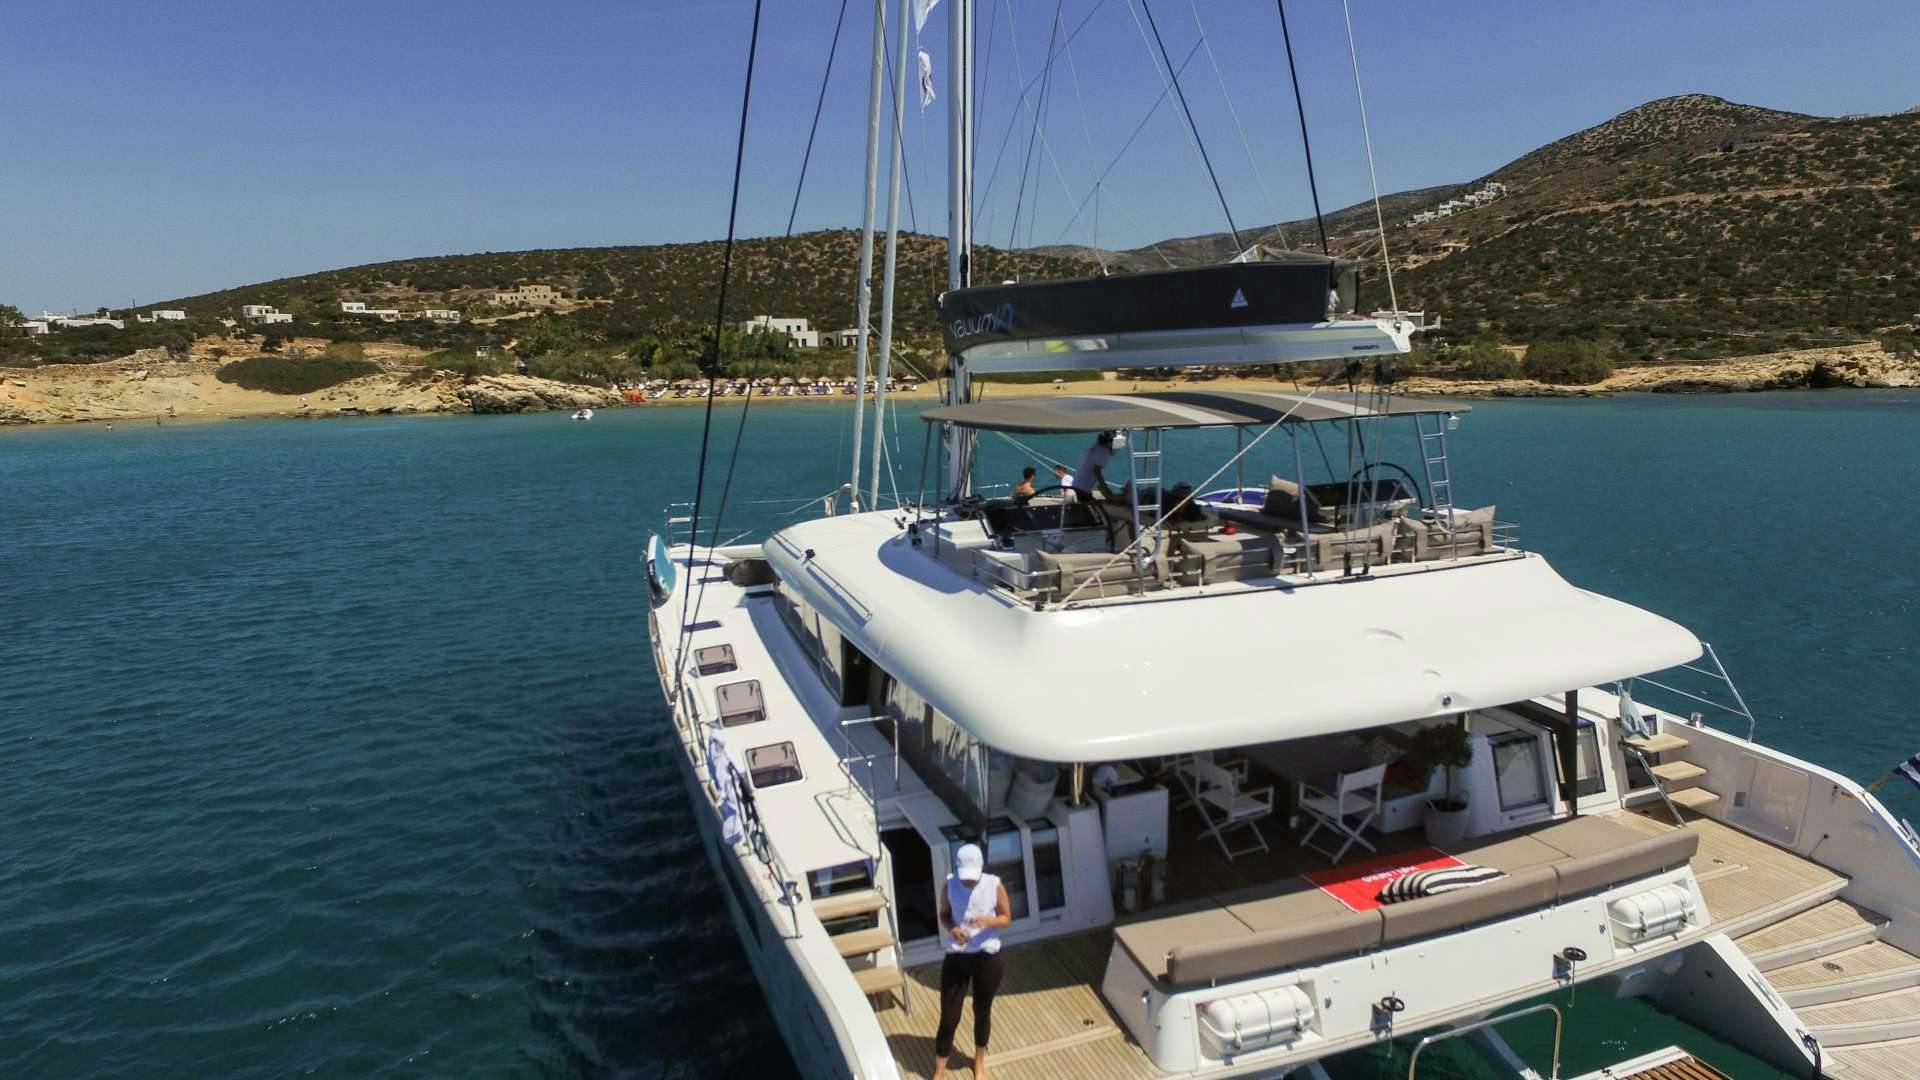 valium62 - Catamaran Charter Saint Vincent and the Grenadines & Boat hire in Greece 1